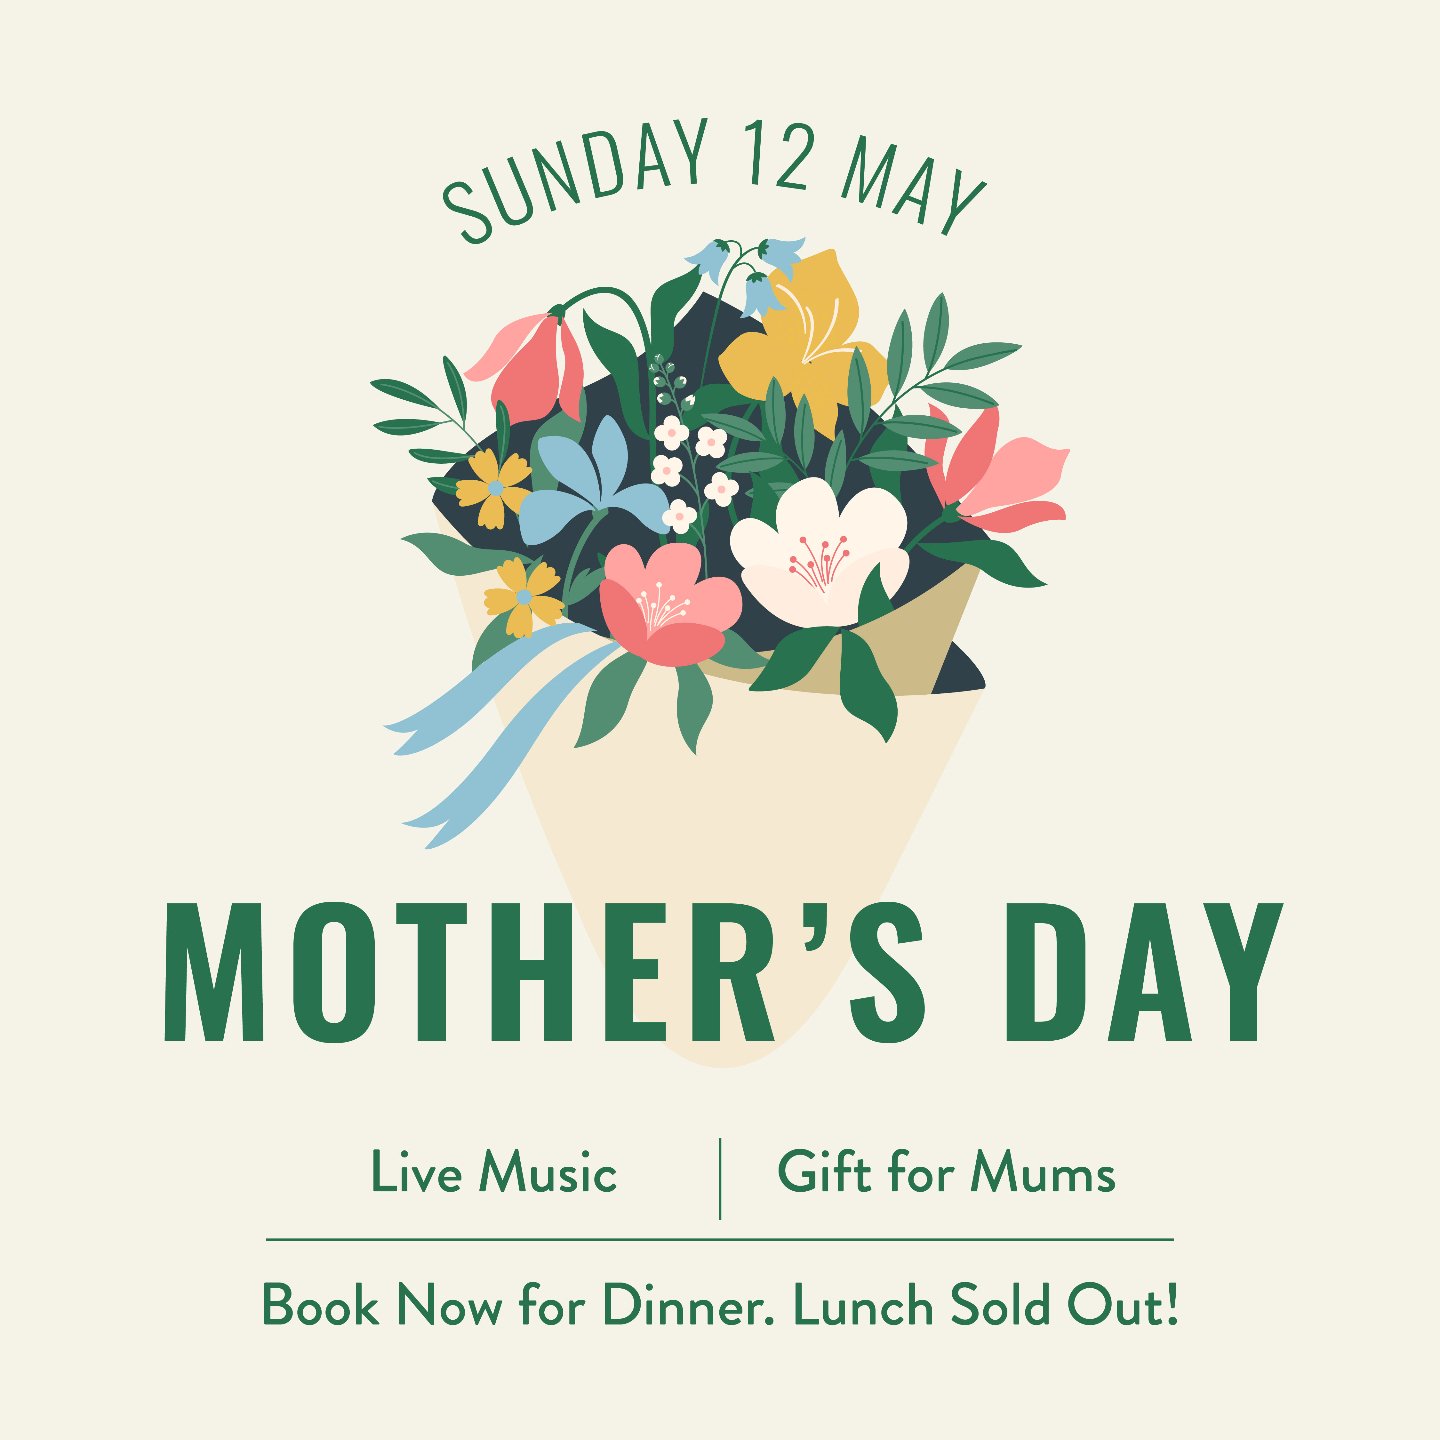 Mother's Day // It's not too late to book for dinner. Lunch is fully booked.

Book via our website - it's so easy.

https://www.burrawangvillagehotel.com.au/